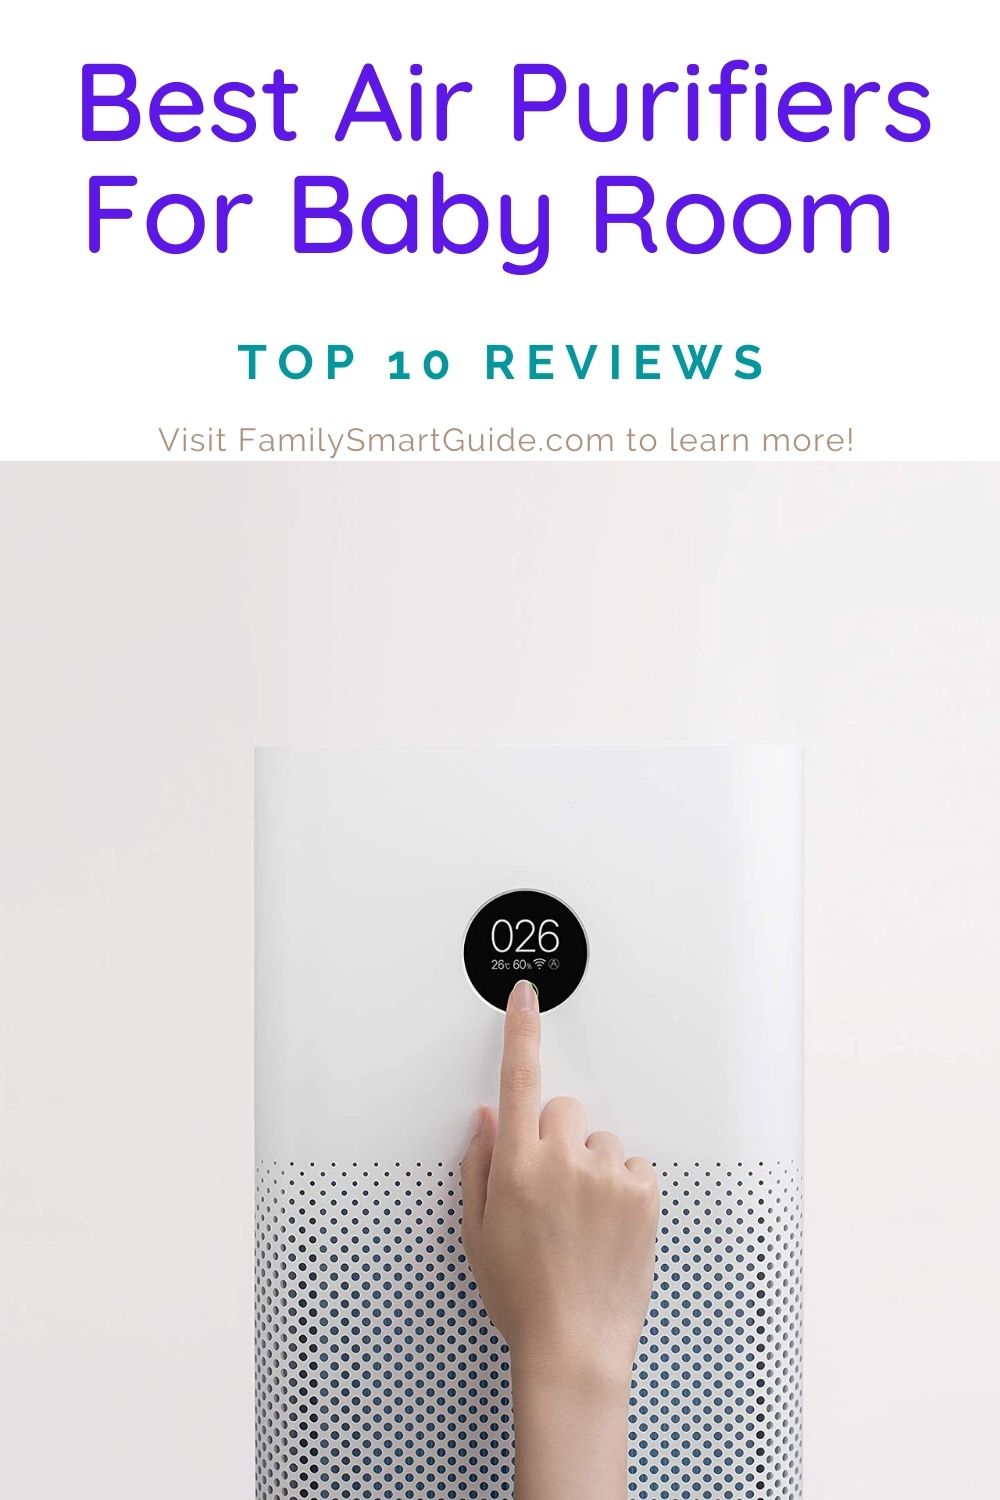 Top 10 Best Air Purifiers For Baby Room Reviews